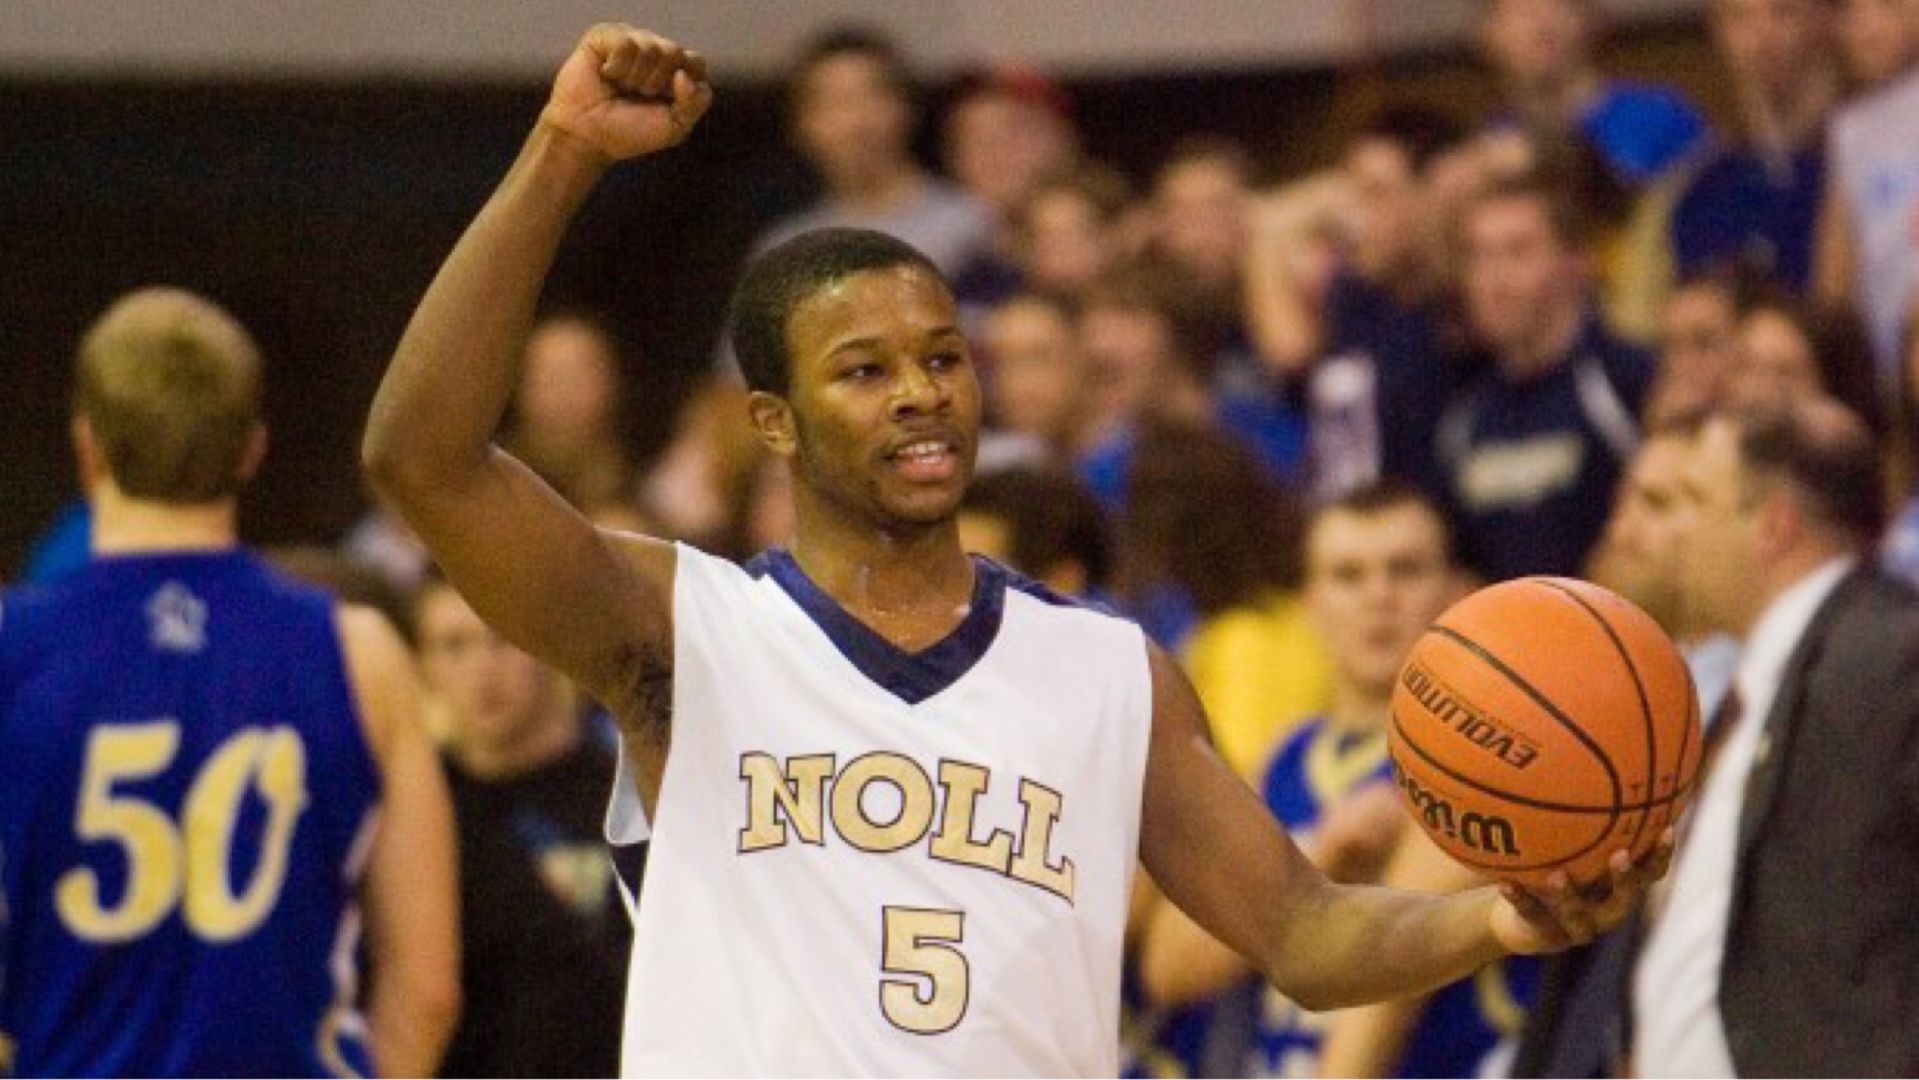 UPDATE: John Dodson III ‘excited’ to return to Bishop Noll as boys basketball coach